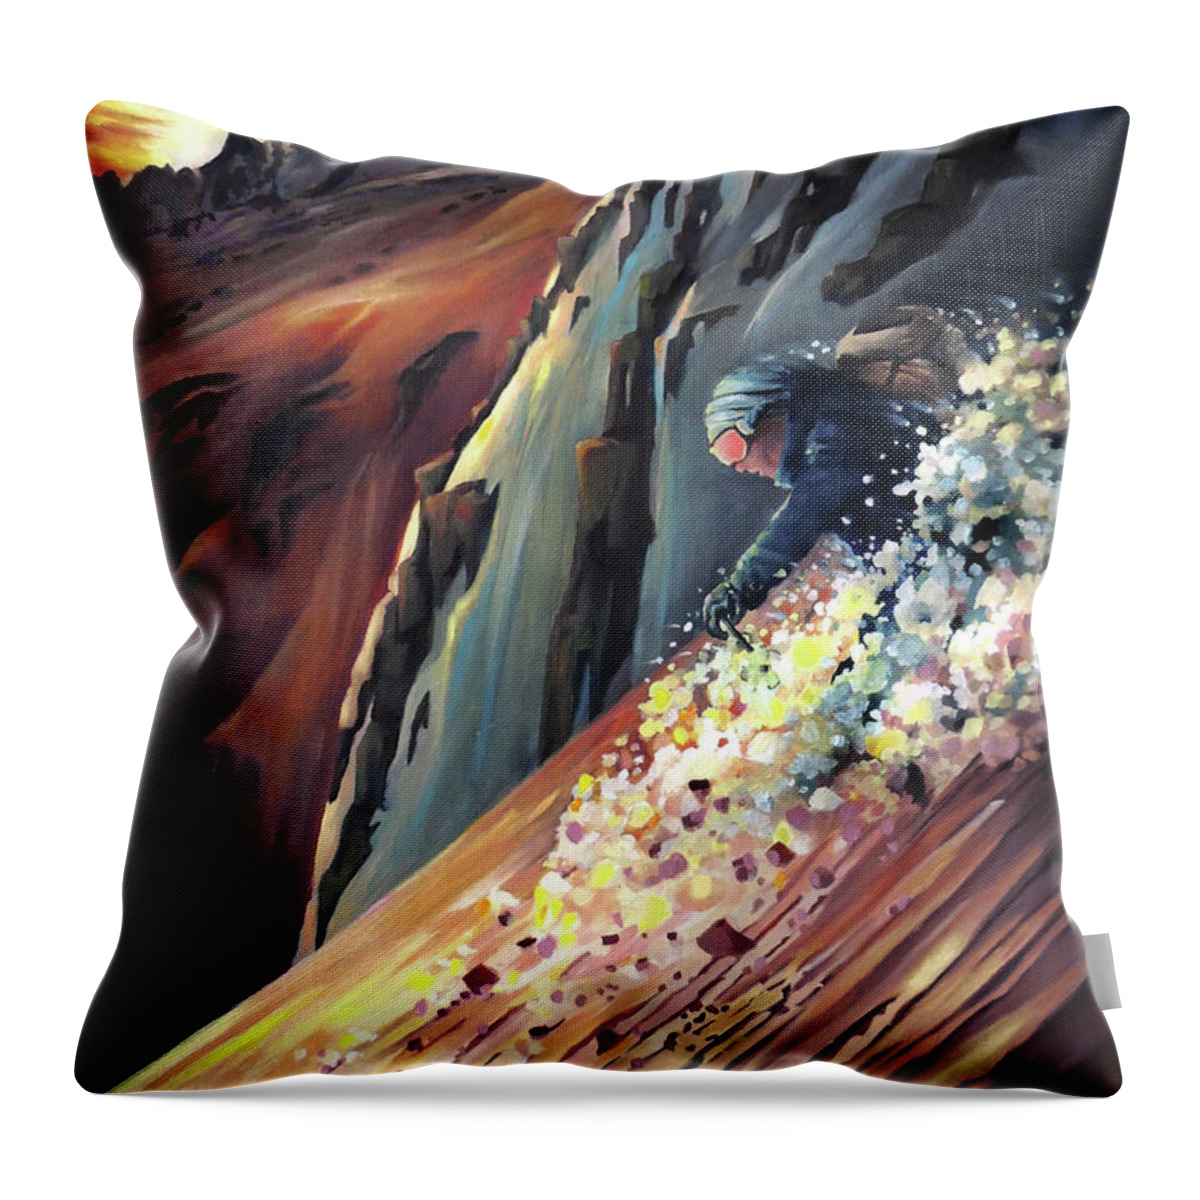 Steeps Throw Pillow featuring the painting Skier On The Steeps by Nancy Griswold